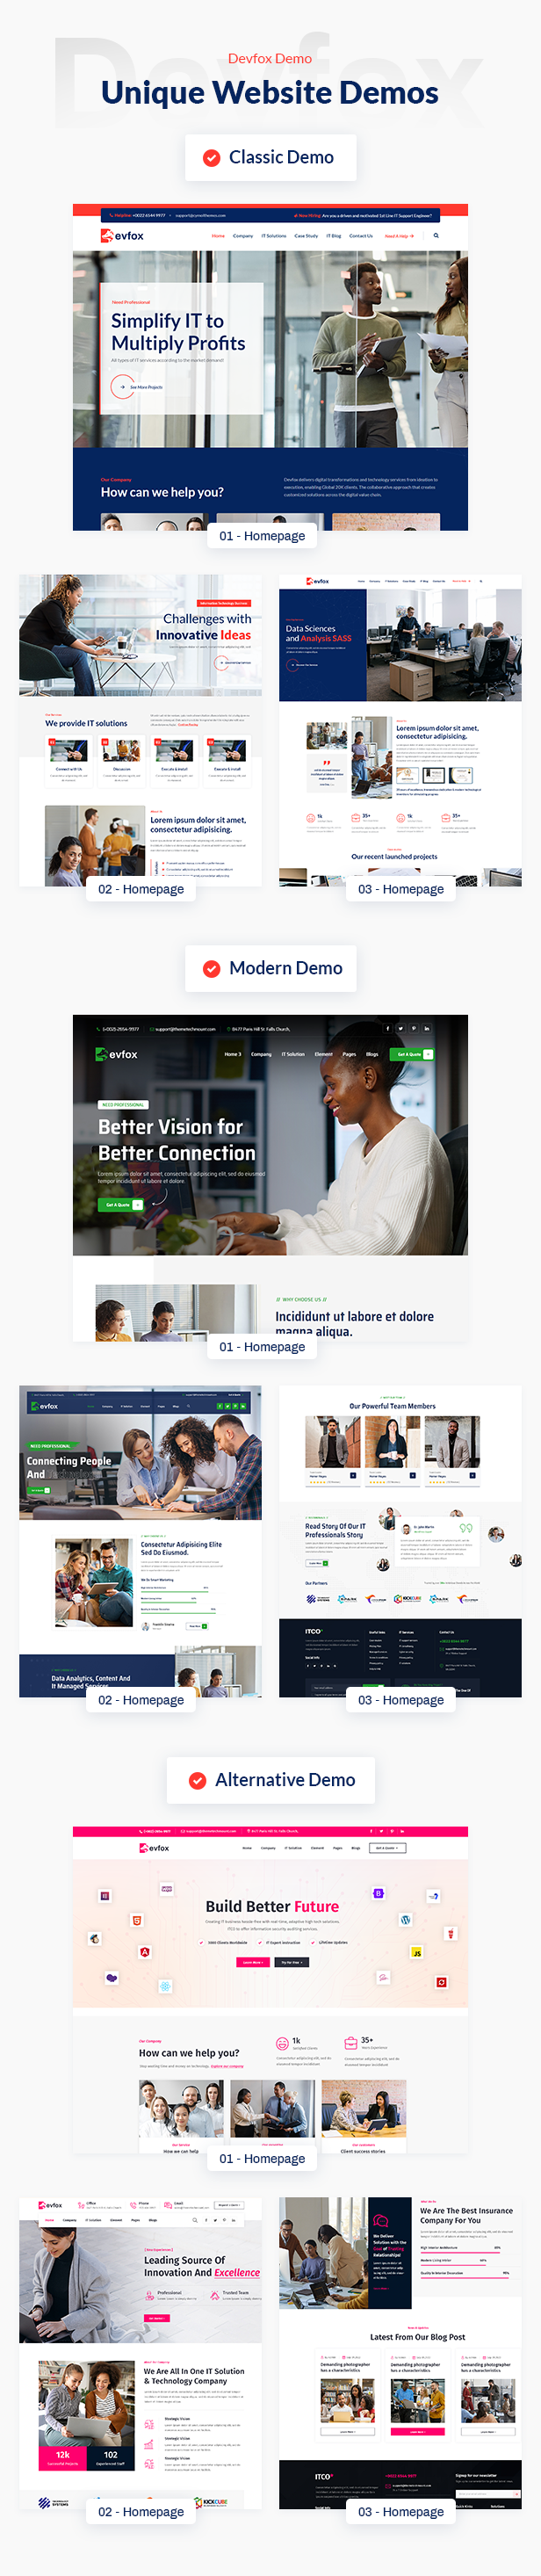 DevFox  - IT Solutions and Services HTML5 Template